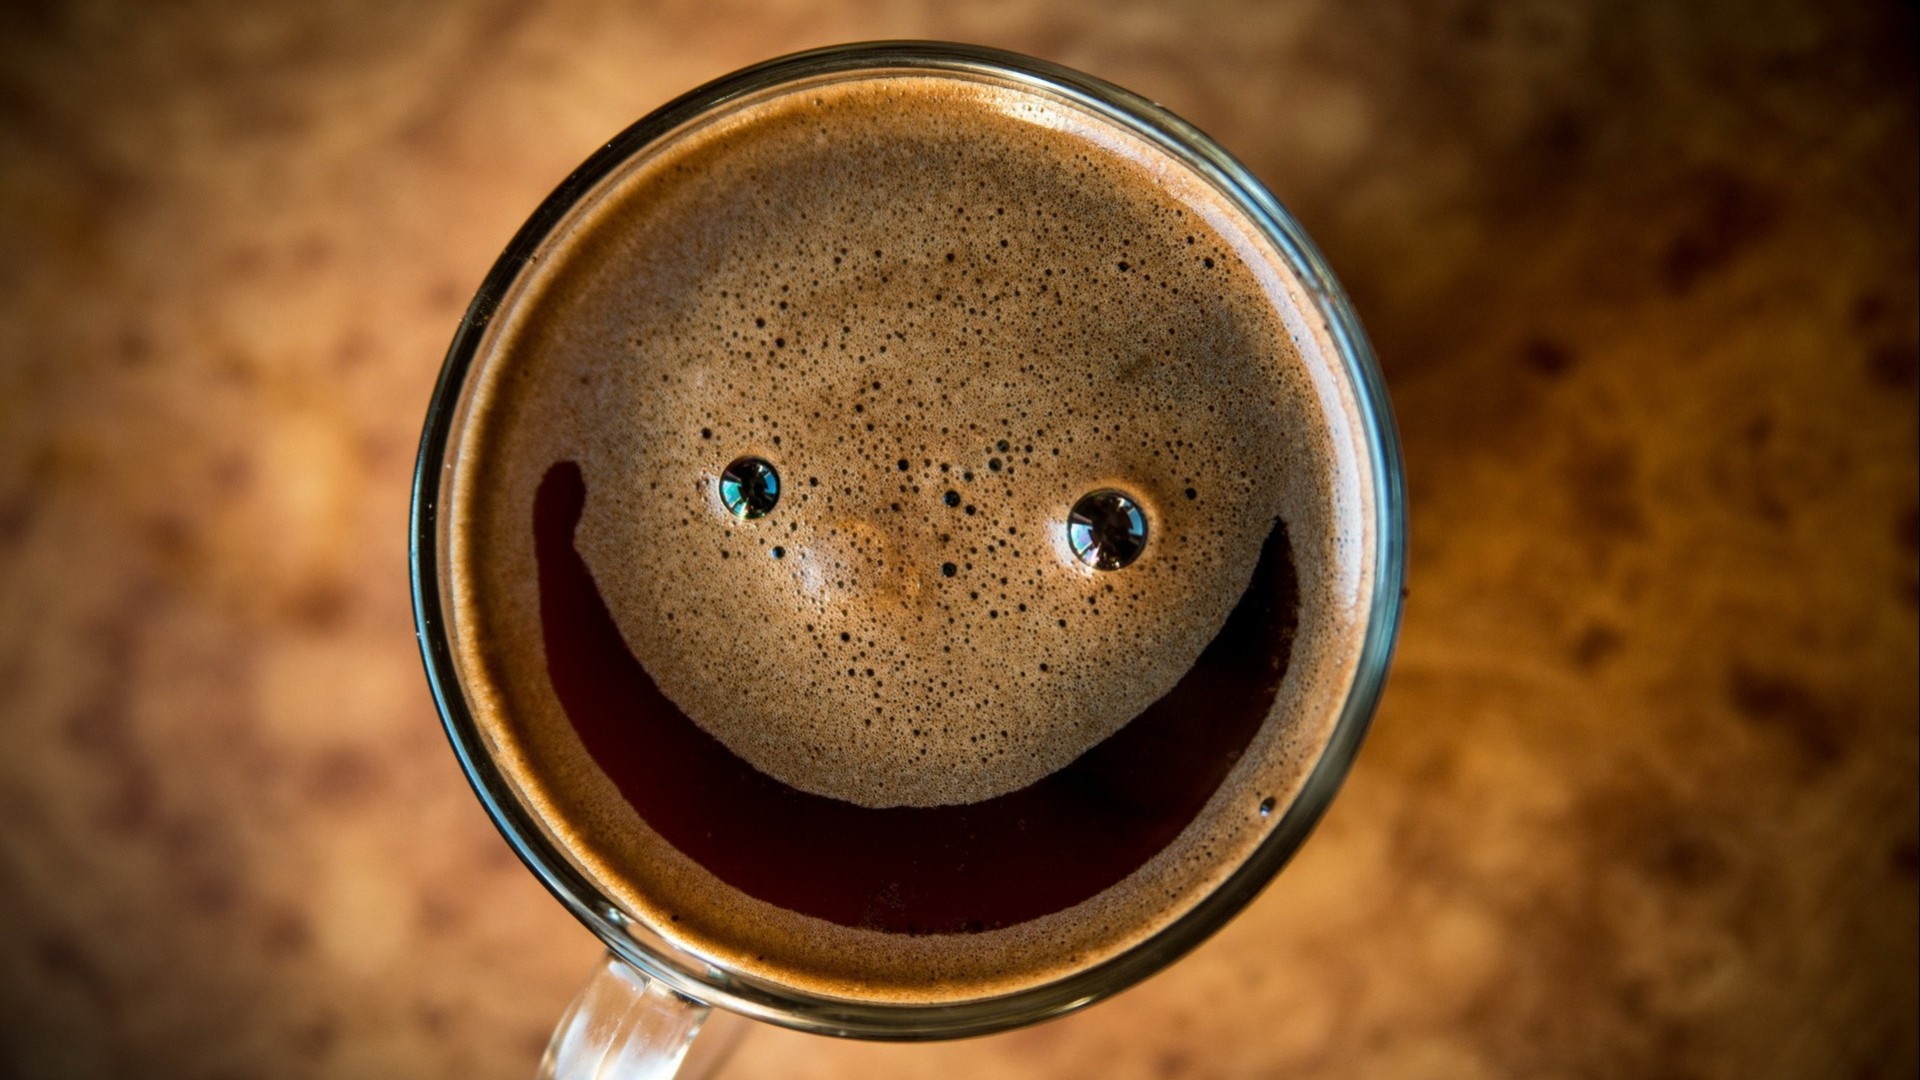 Wallpaper : smiling, blue, coffee, drink, glass, top view, circle ...